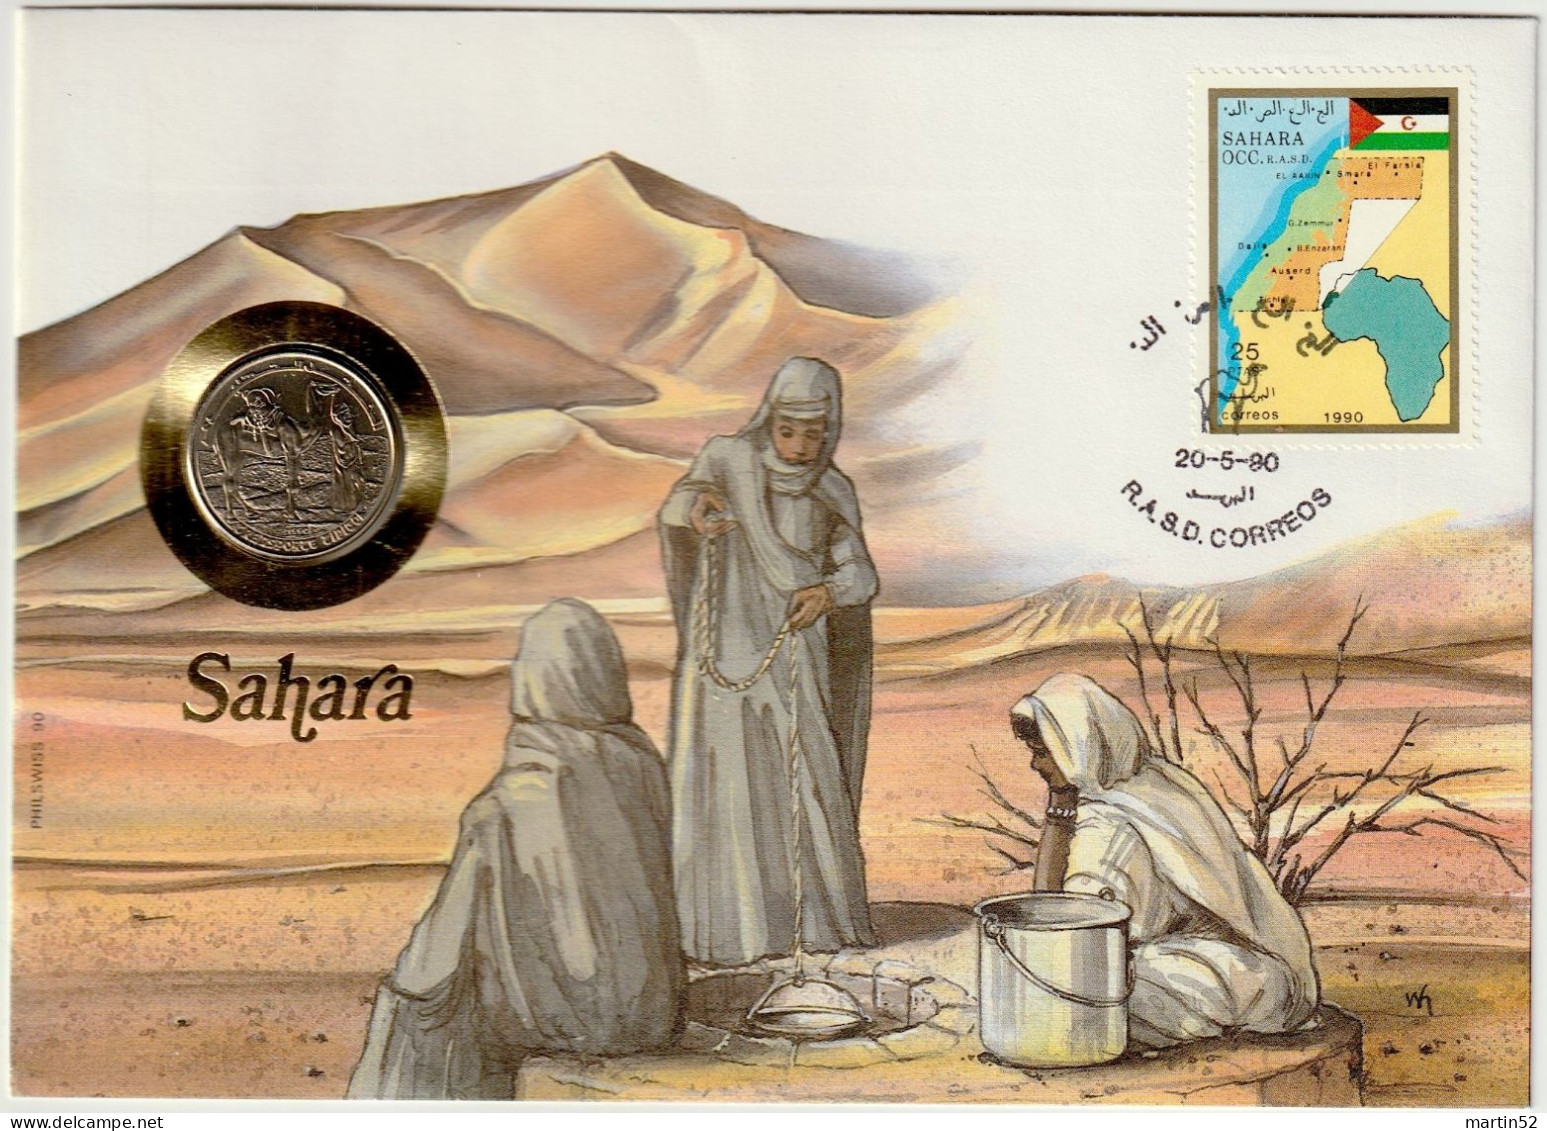 SAHARA OCC.1990: Numis-letter With "coin" And Semi-official Stamp With Postmark R.A.S.D CORREOS 20-5-90 - Spanische Sahara